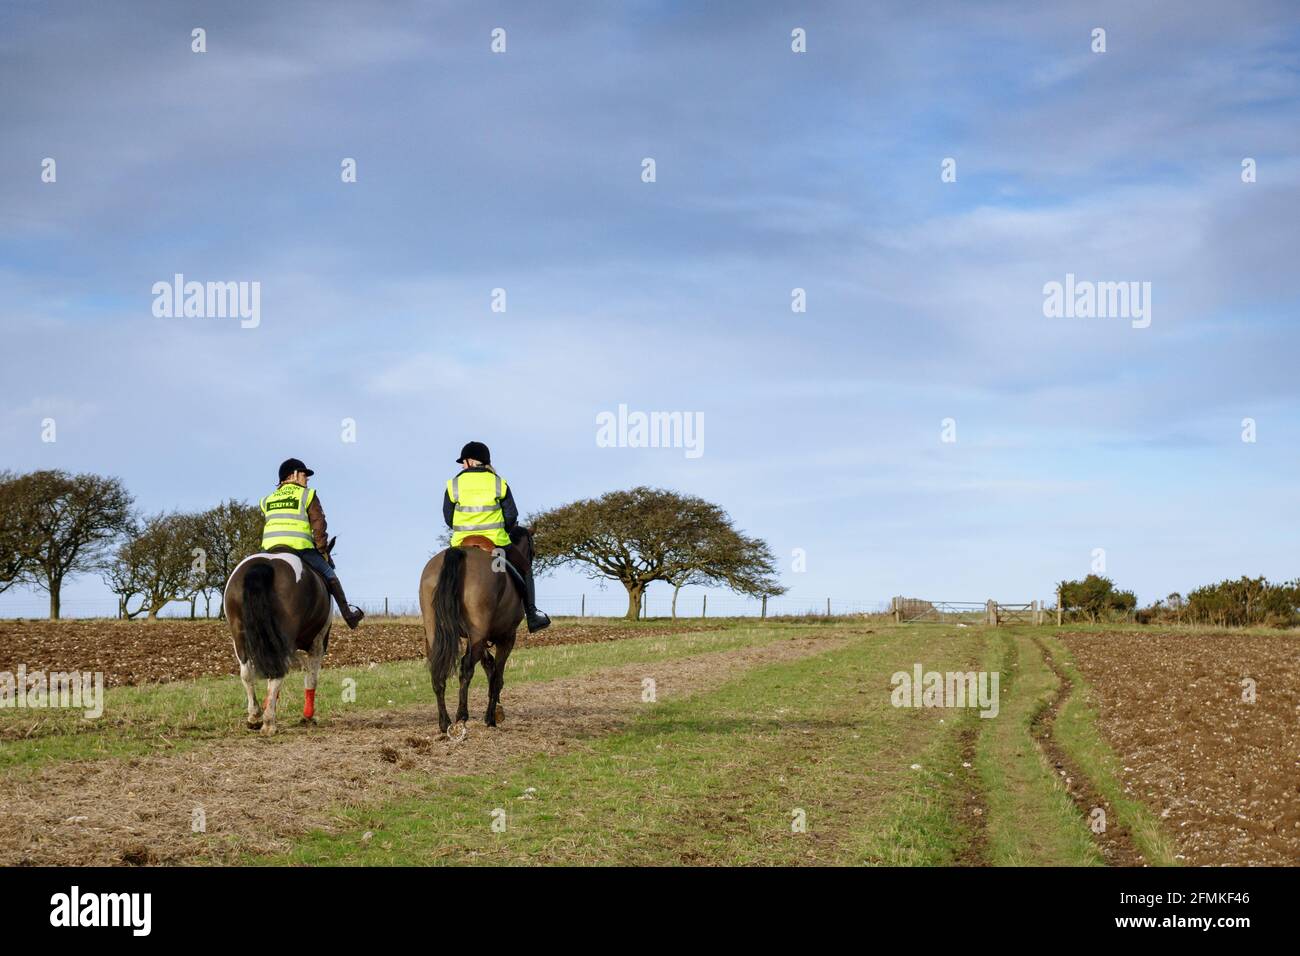 Two women riding horses wearing high visibility jackets on the South Downs near Ditchling, Sussex, England Stock Photo